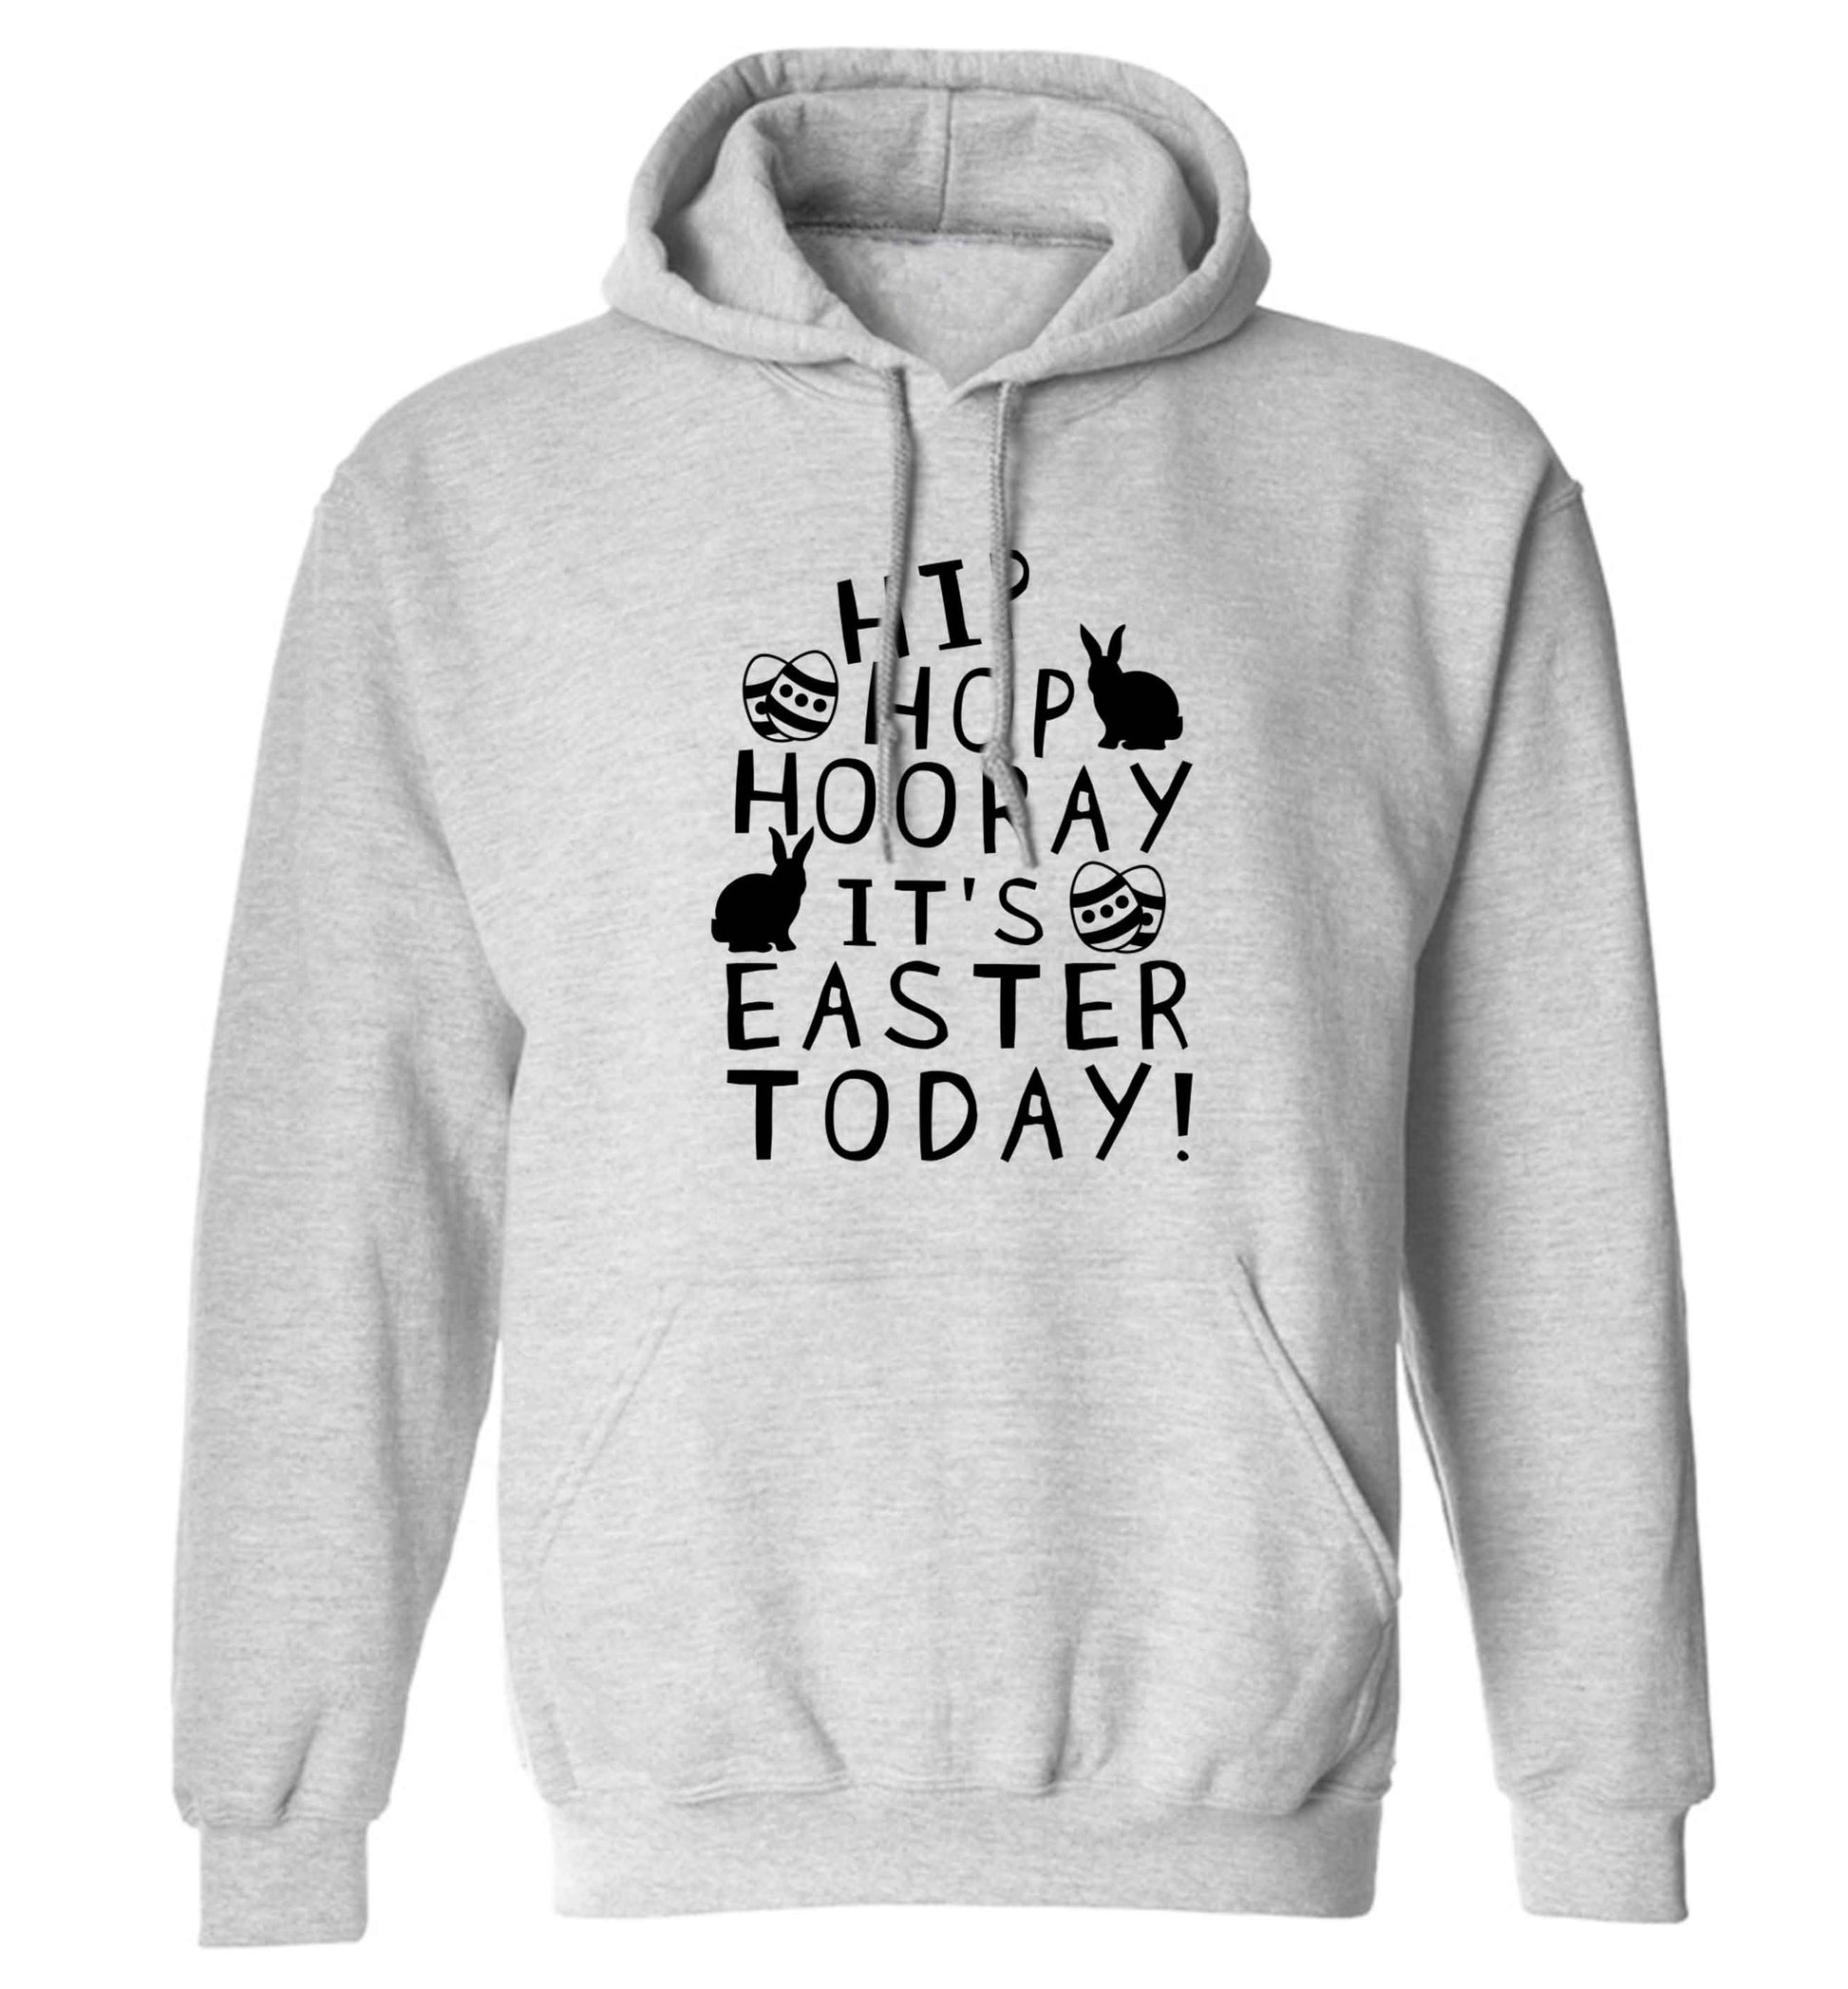 Hip hip hooray it's Easter today! adults unisex grey hoodie 2XL